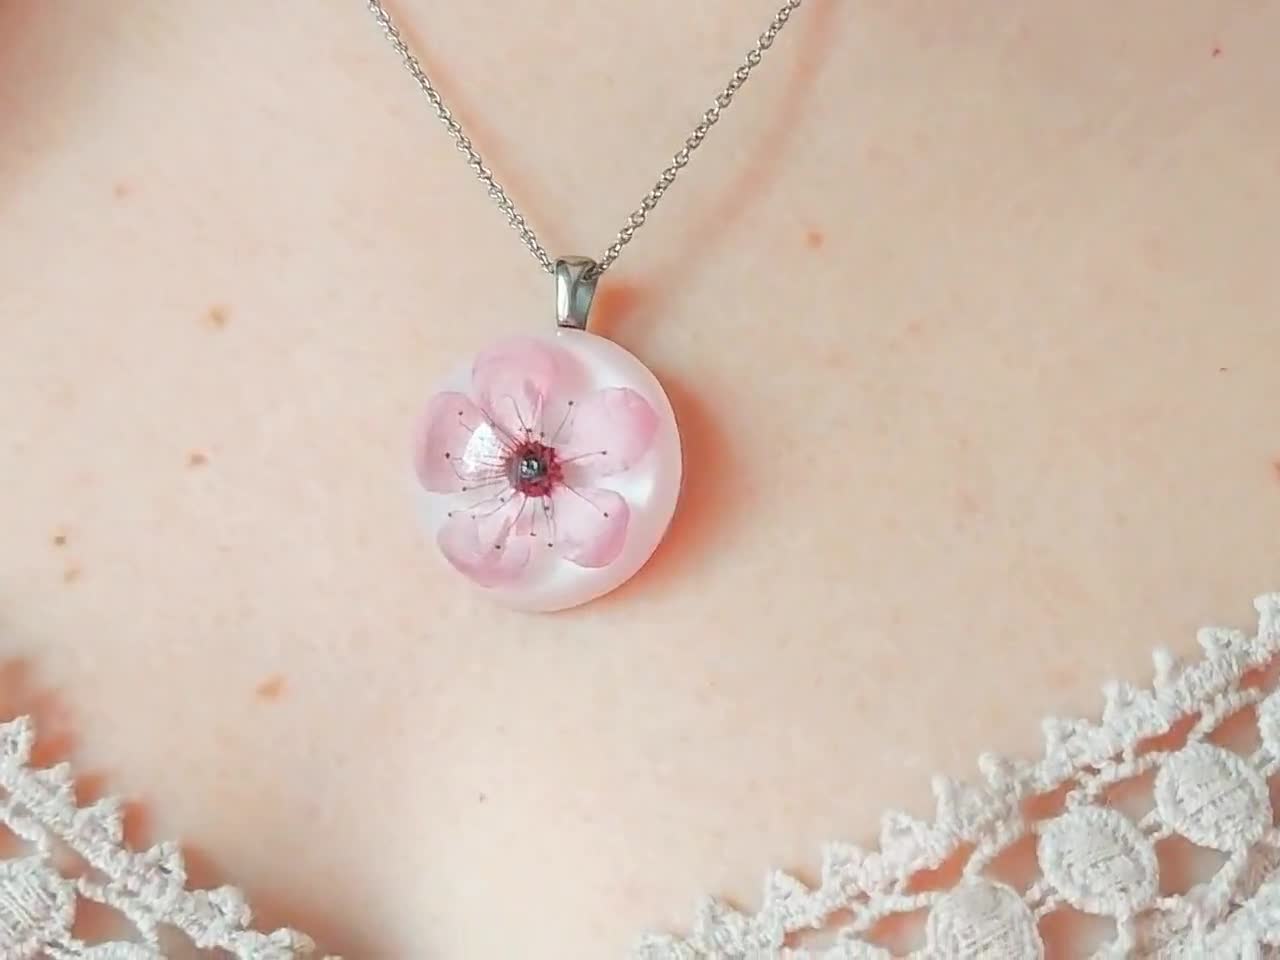 Pink Cherry Blossom Necklace